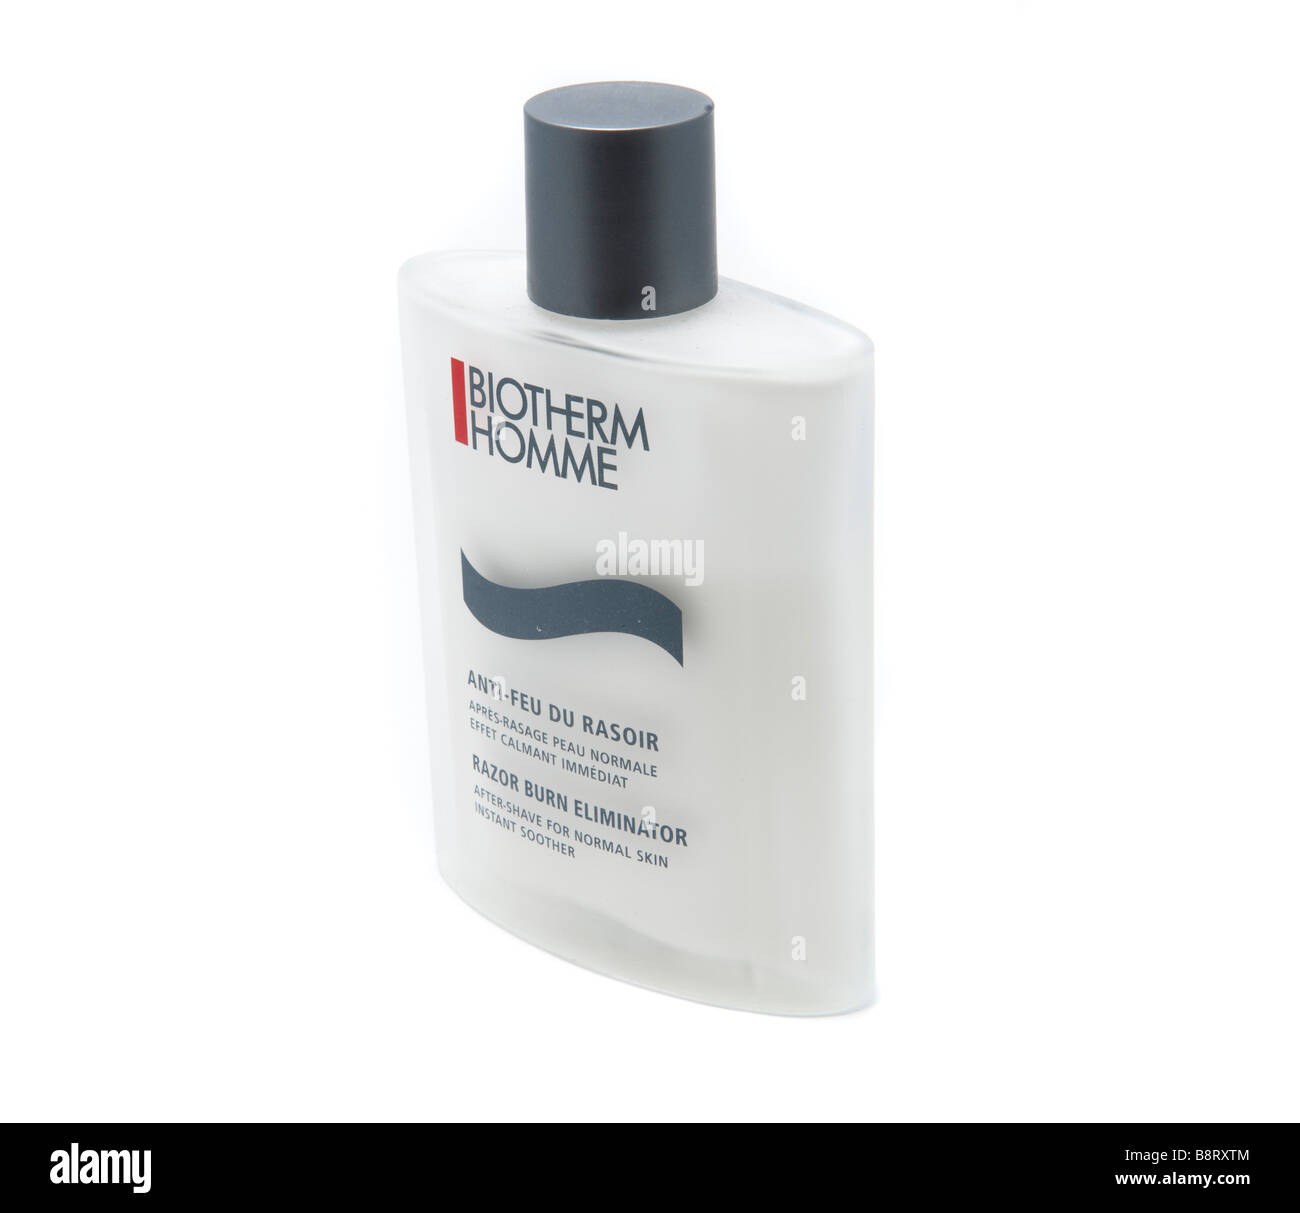 A Biotherm homme after-shave bottle over a white background. Stock Photo